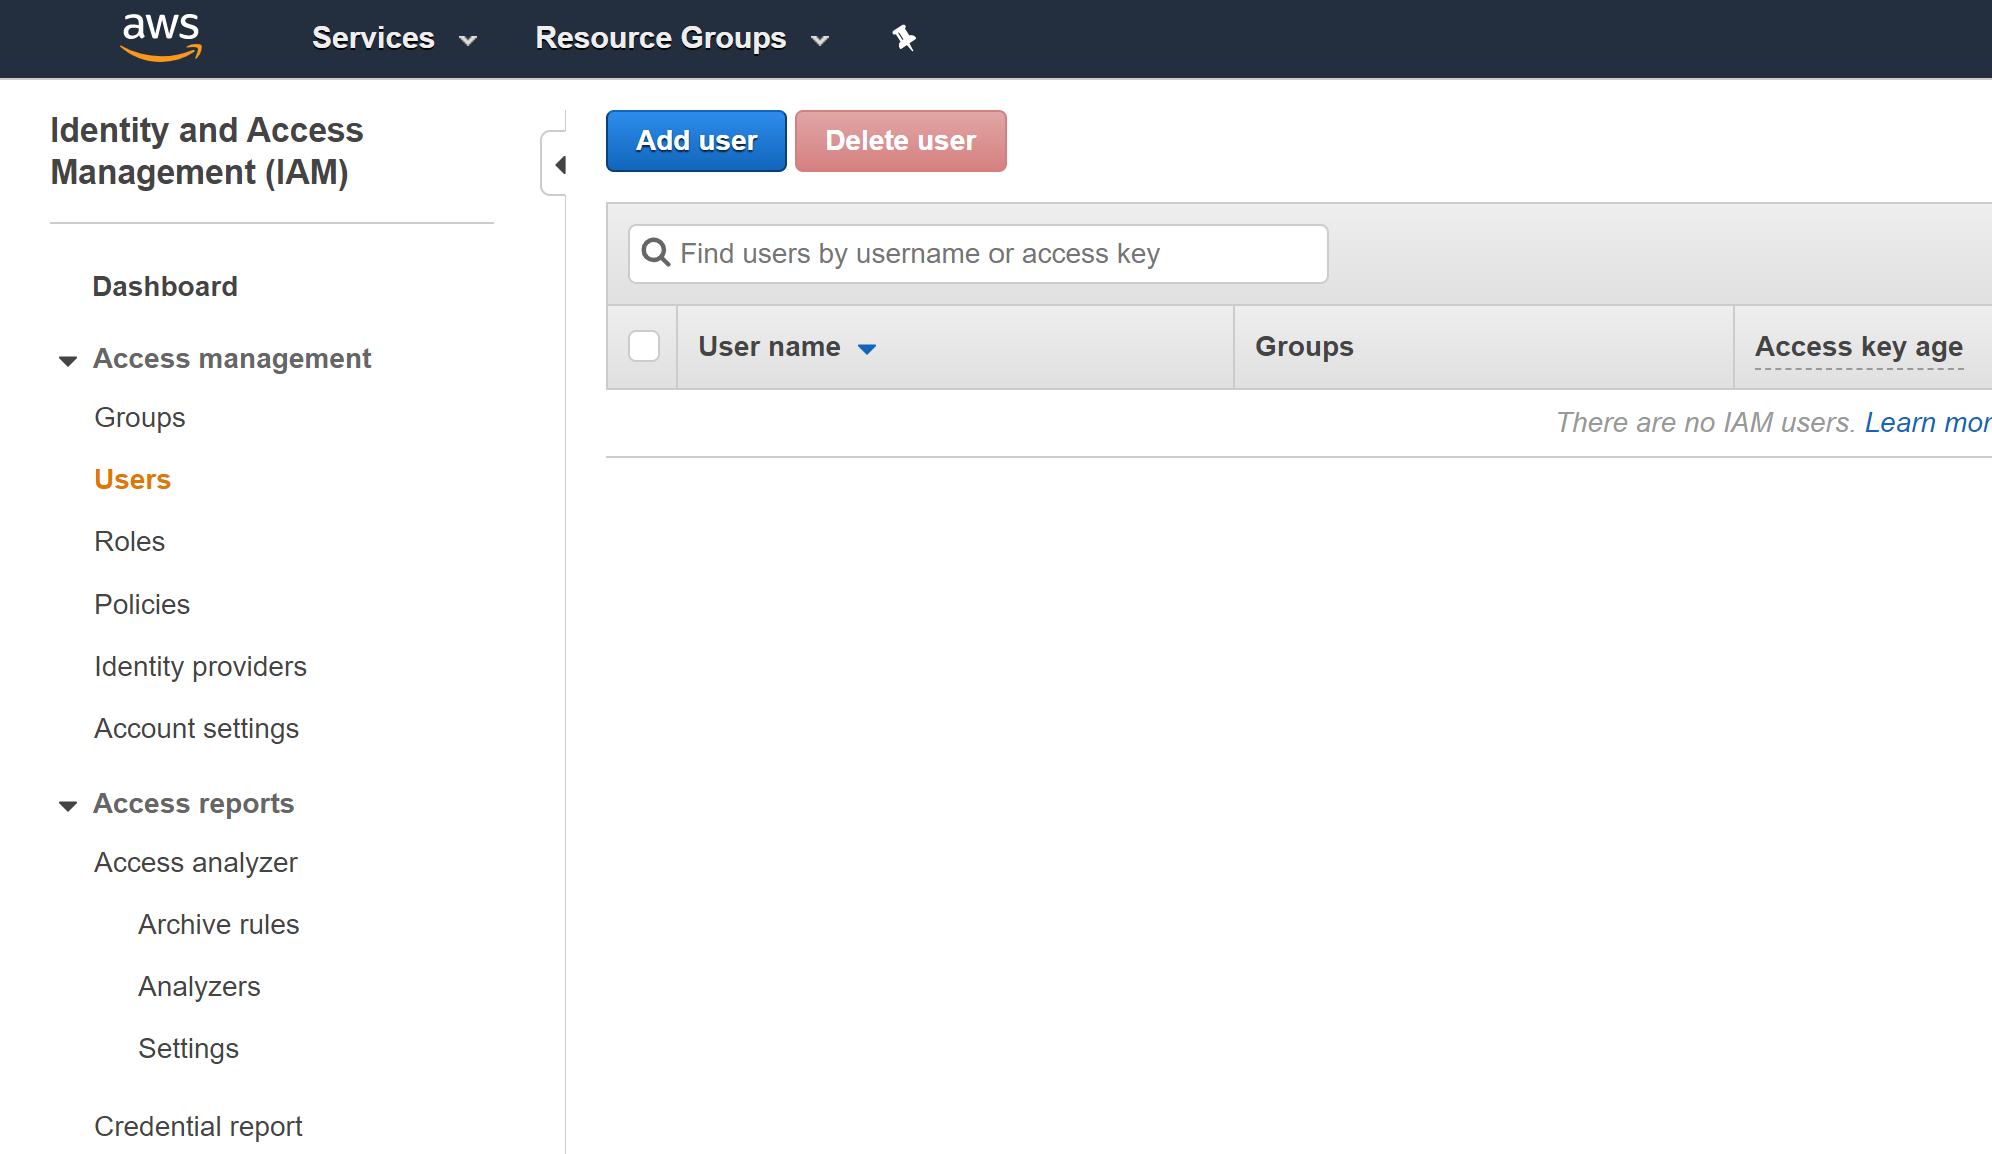 A screenshot of creating a new user in an AWS cloud console.